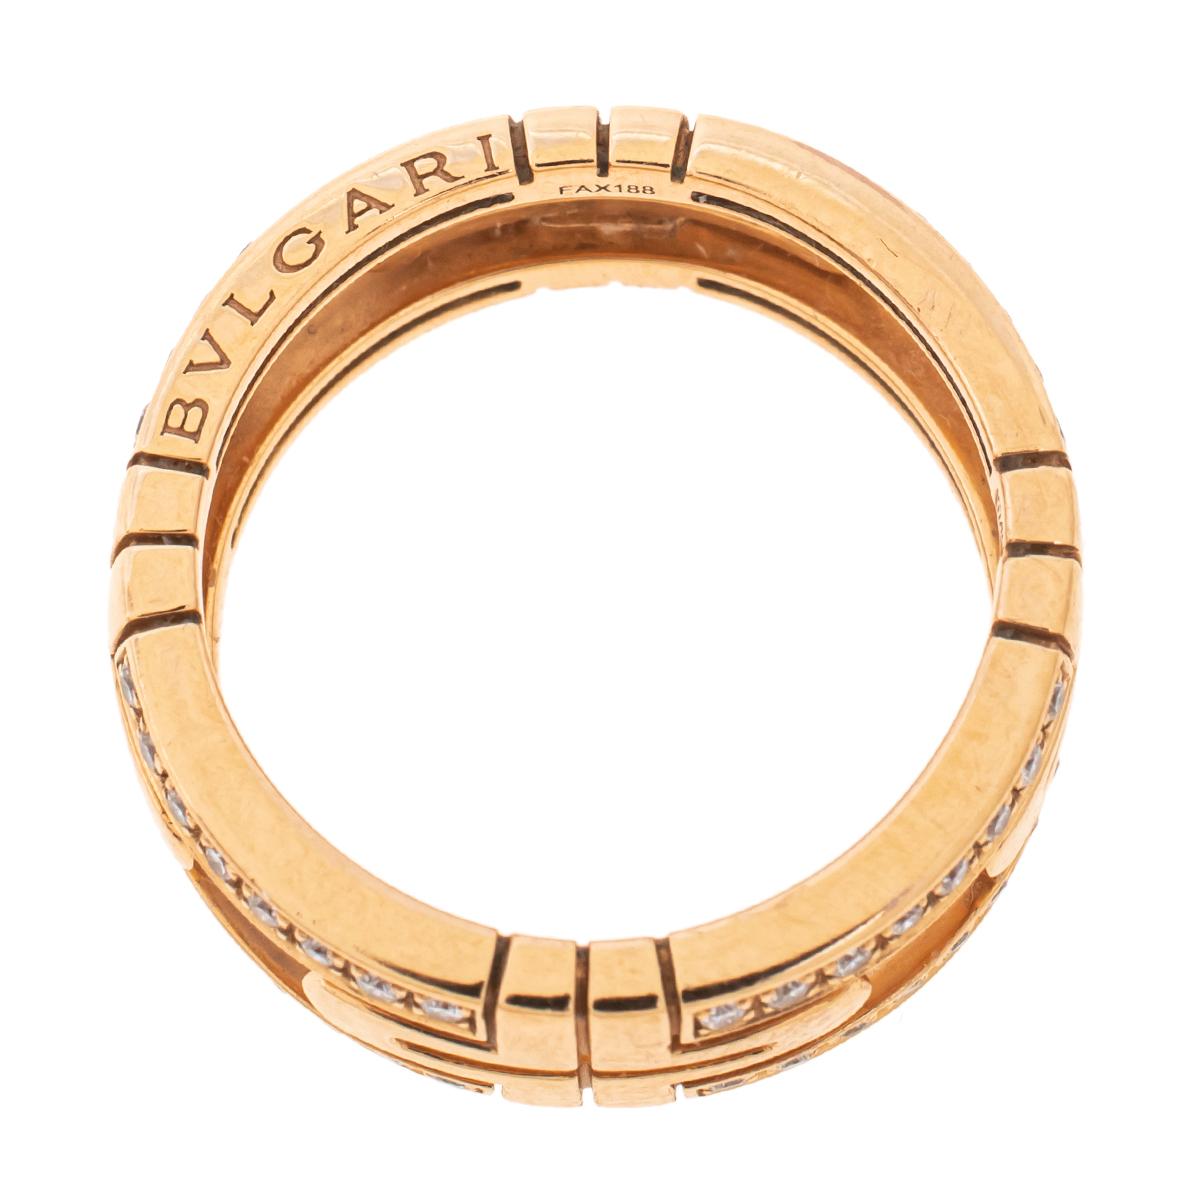 This Parentesi ring from Bvlgari is characterized by strong geometric shapes partially set with sparkling diamonds. The ring is sculpted from 18k rose gold to a smooth finish and is bound to offer an element of luxury to your ensemble of the day or